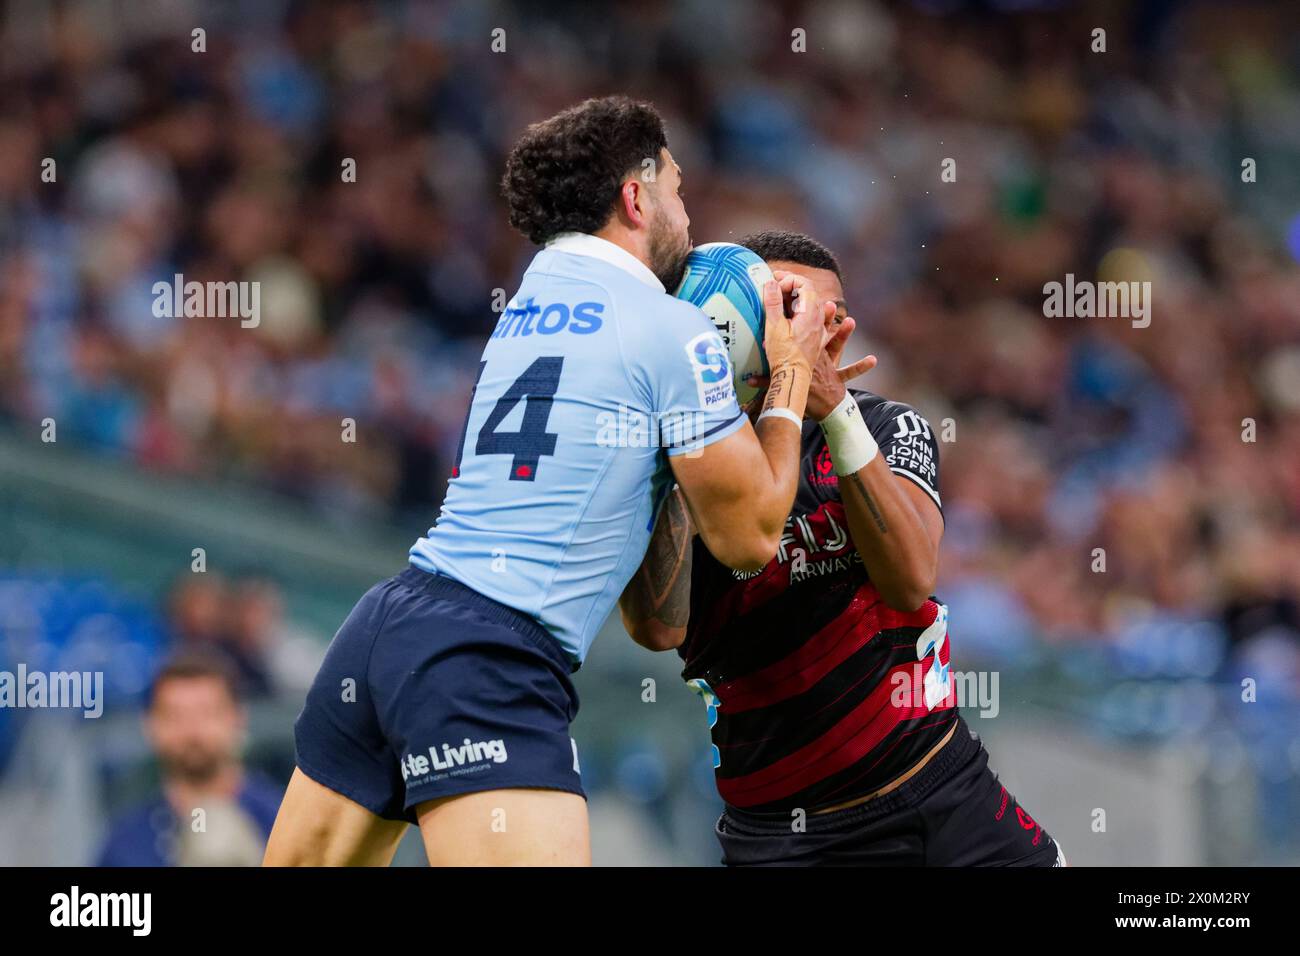 Sydney, Australia. 12th Apr, 2024. Triston Reilly of the Waratahs jumps to catch the ball during the Super Rugby Pacific 2024 Rd8 match between the Waratahs and the Crusaders at Allianz Stadium on April 12, 2024 in Sydney, Australia Credit: IOIO IMAGES/Alamy Live News Stock Photo